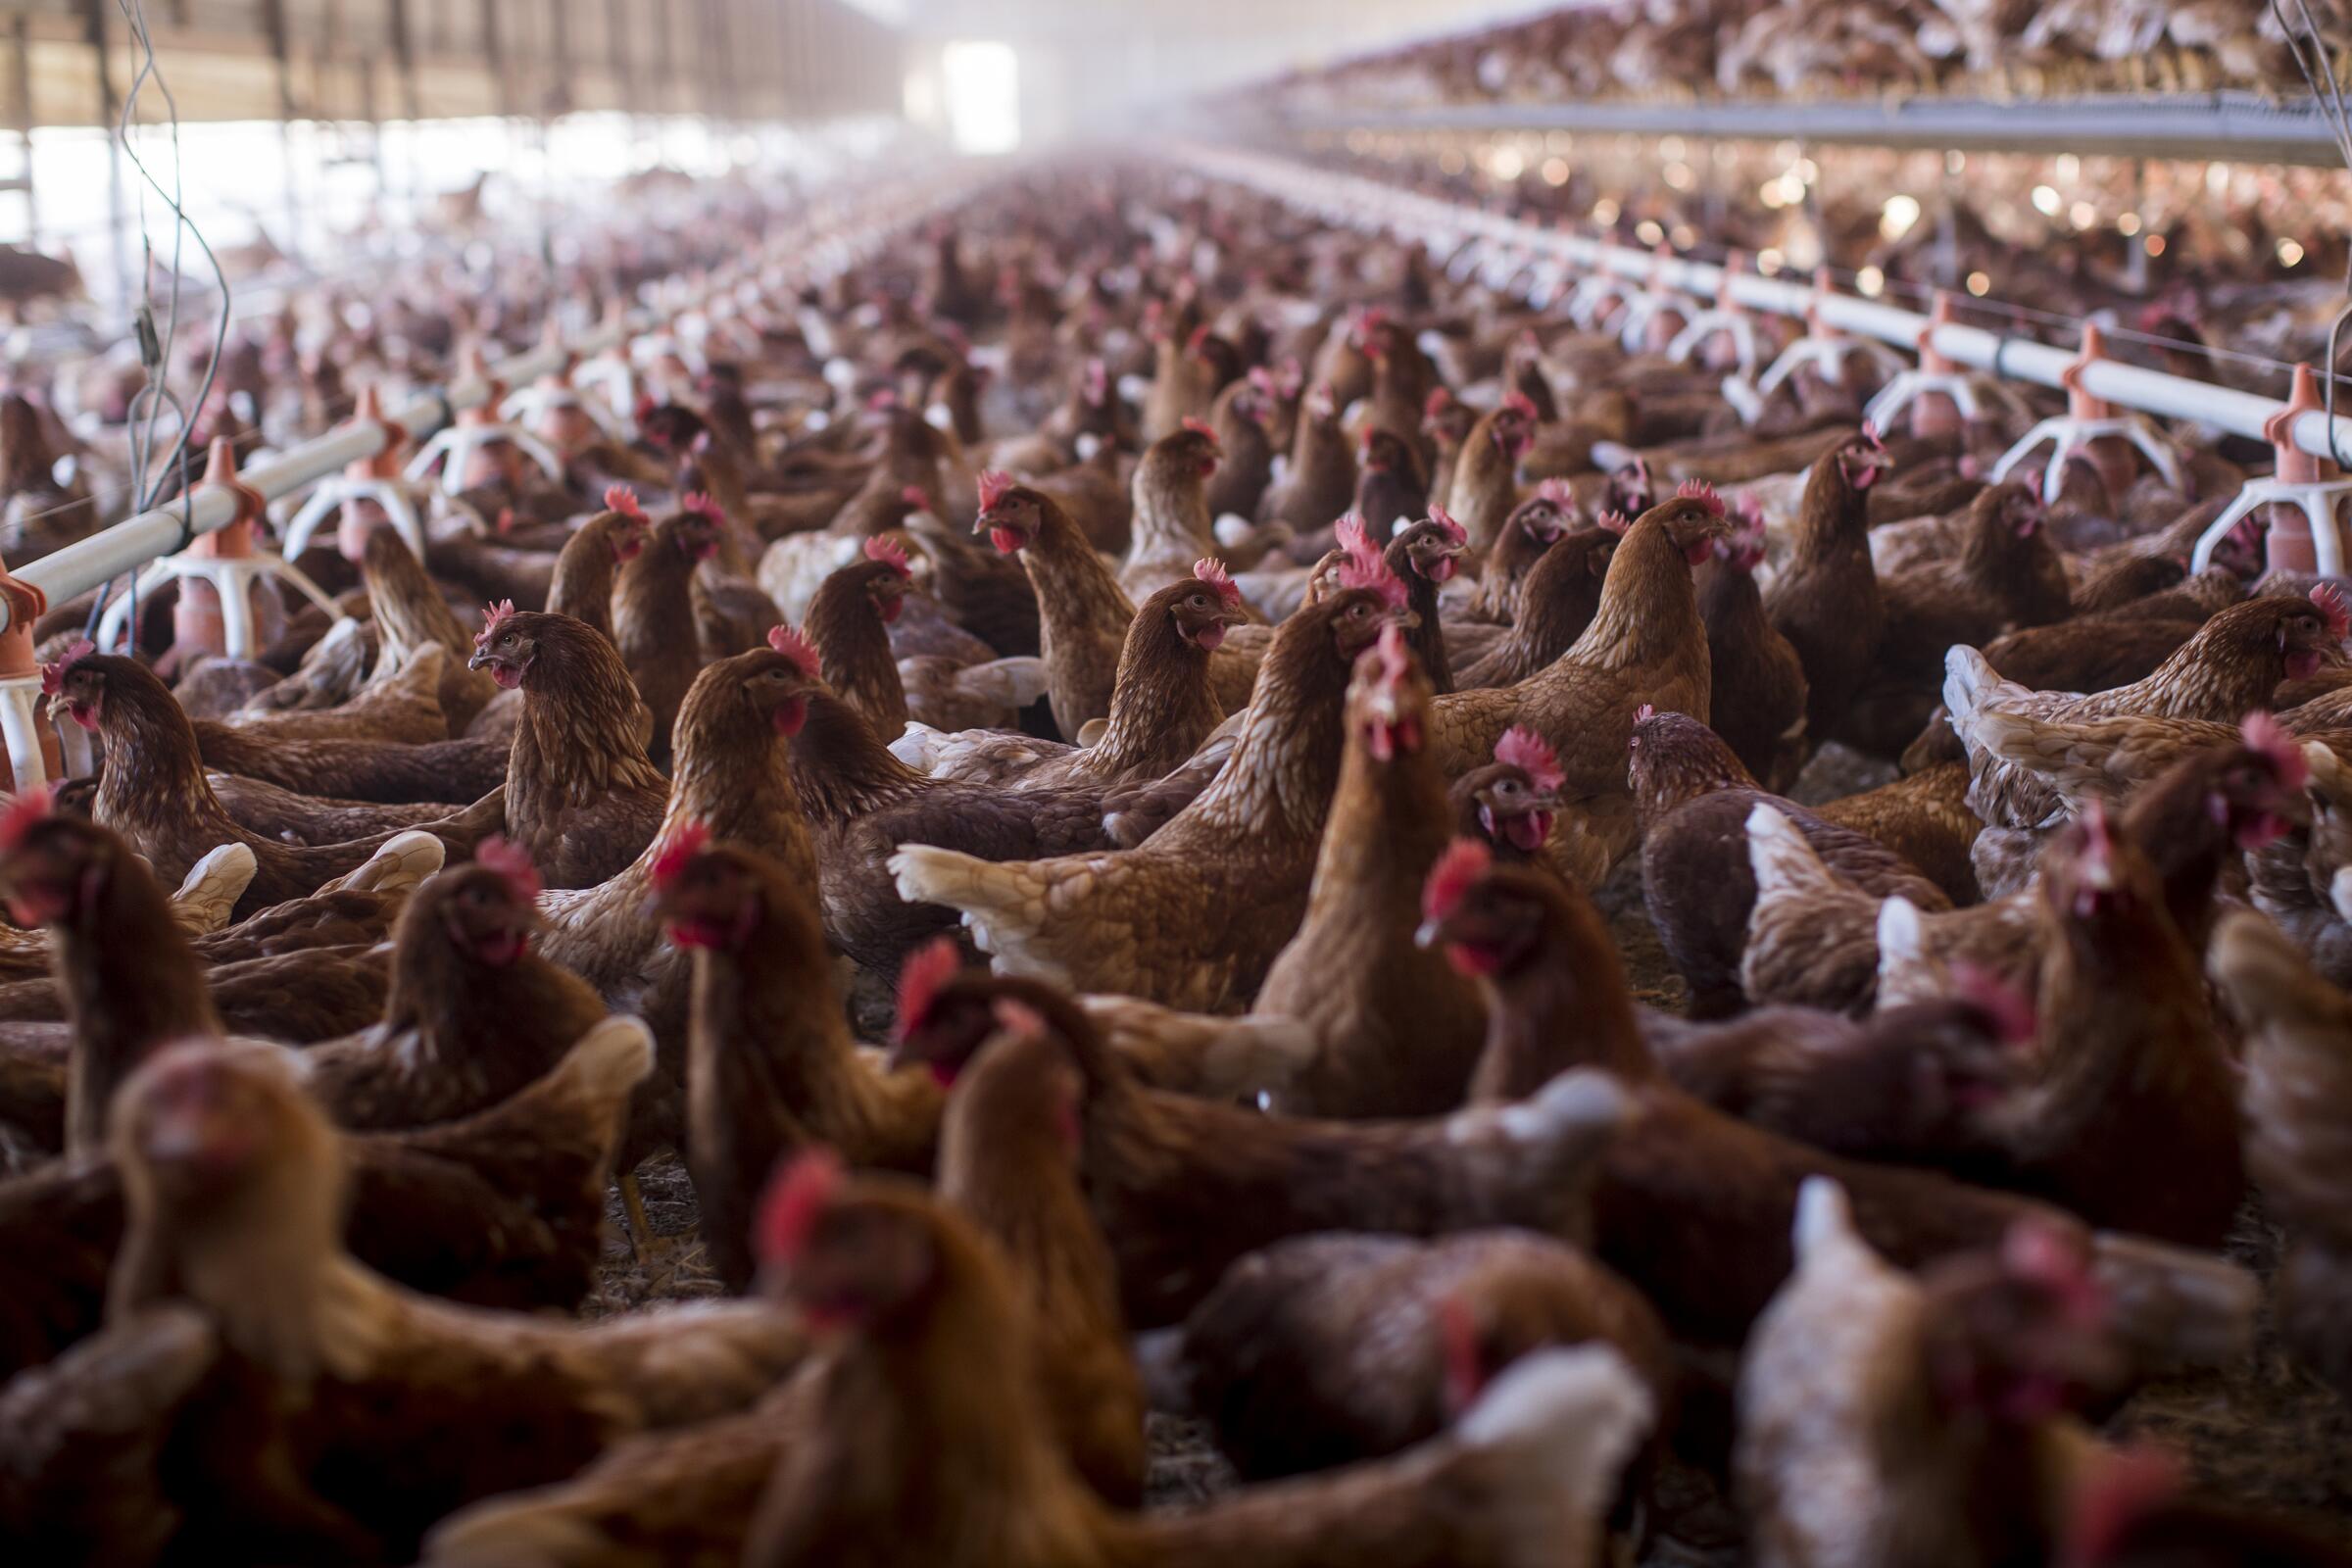 Row upon row of chickens at a farm in Riverside County